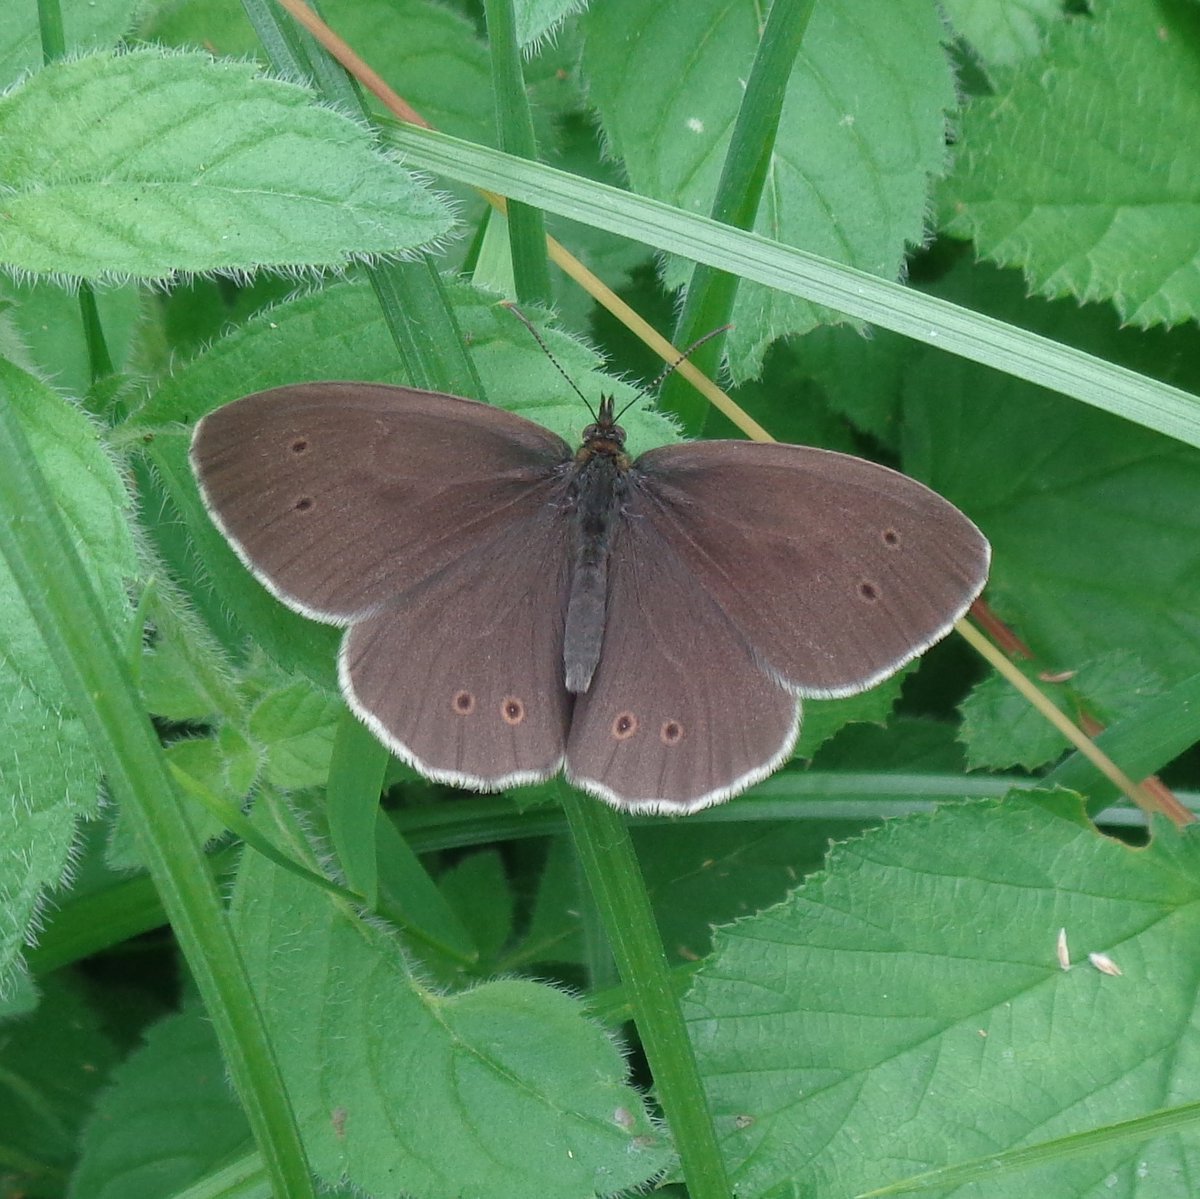 It may be cloudy but lots of butterflies about on my walk today, especially ringlets and skippers. #AfterWorkWalk #butterflies #woods #walking #NaturePhotography #wellbeingweek